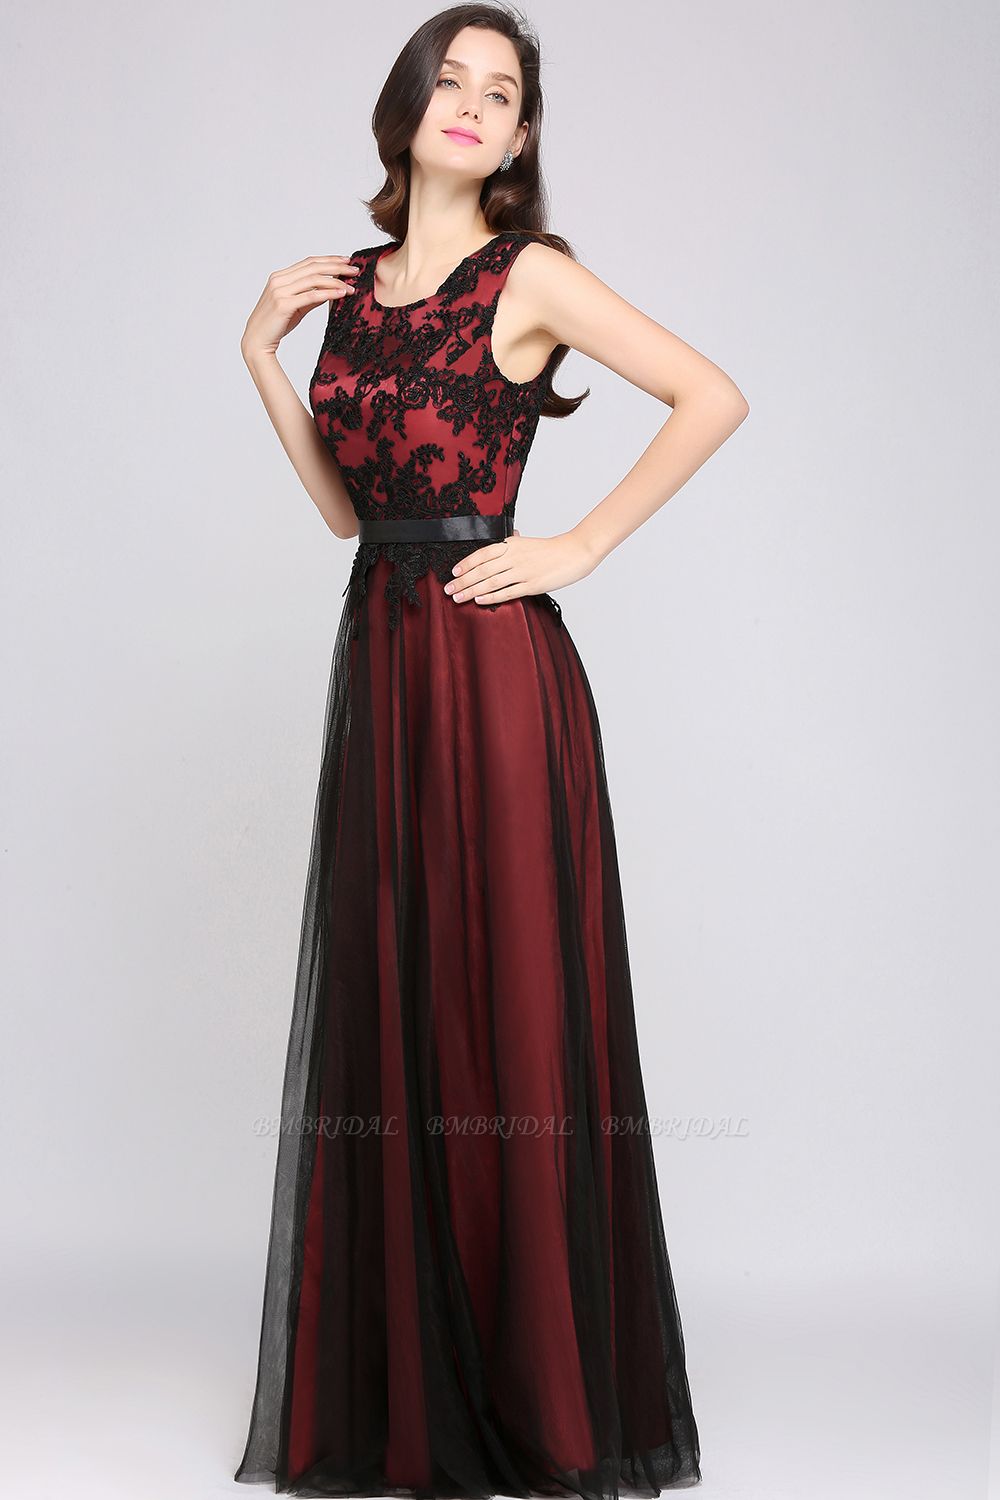 BMbridal Pretty Sleeveless Black Lace Tulle Floor Length Formal Evening Dress with Sash